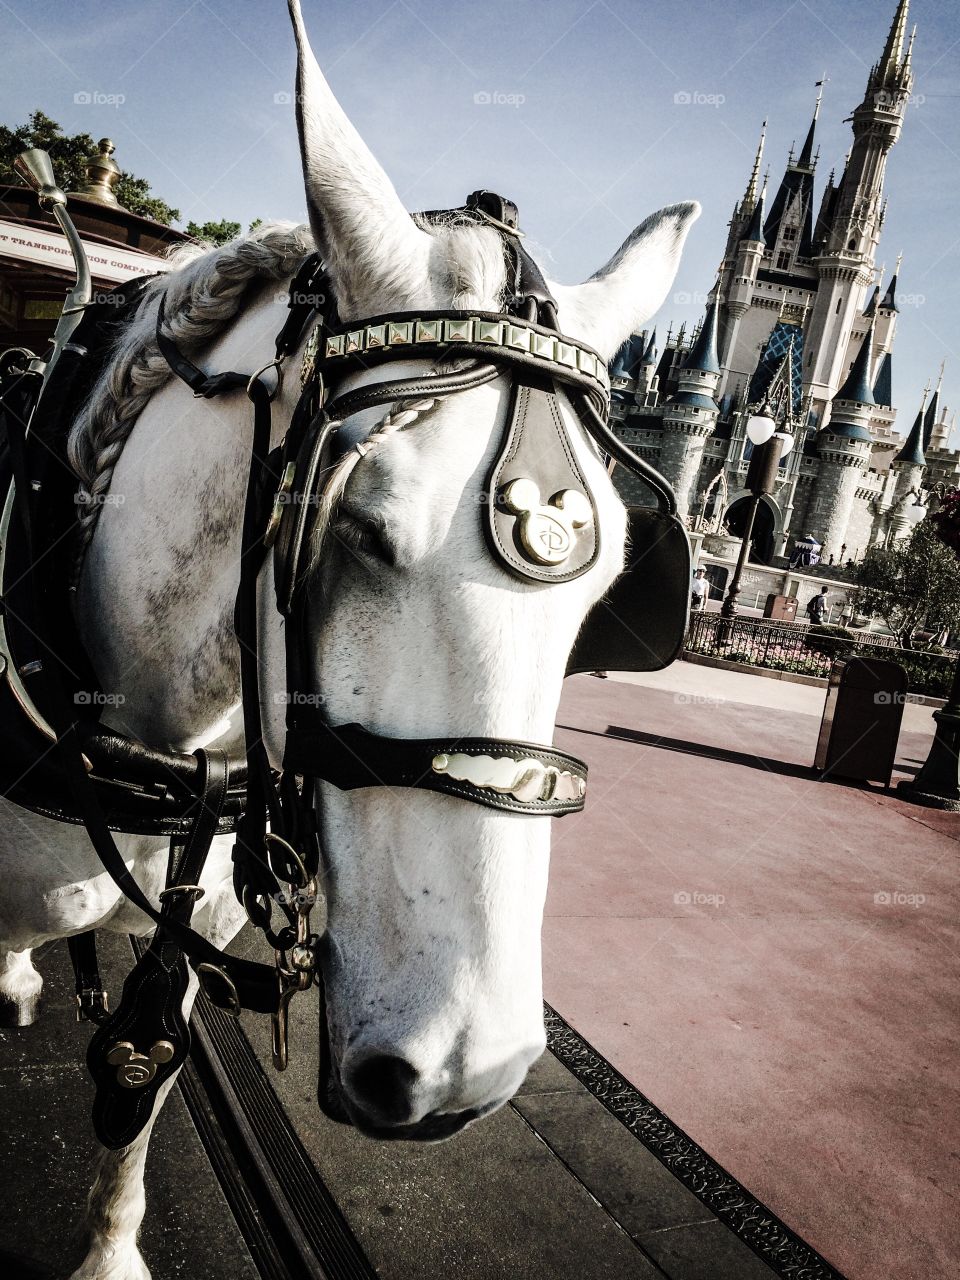 Horsing around the Magic Kingdom. Take a ride into the past on this horse drawn trolley at Walt Disney World. 